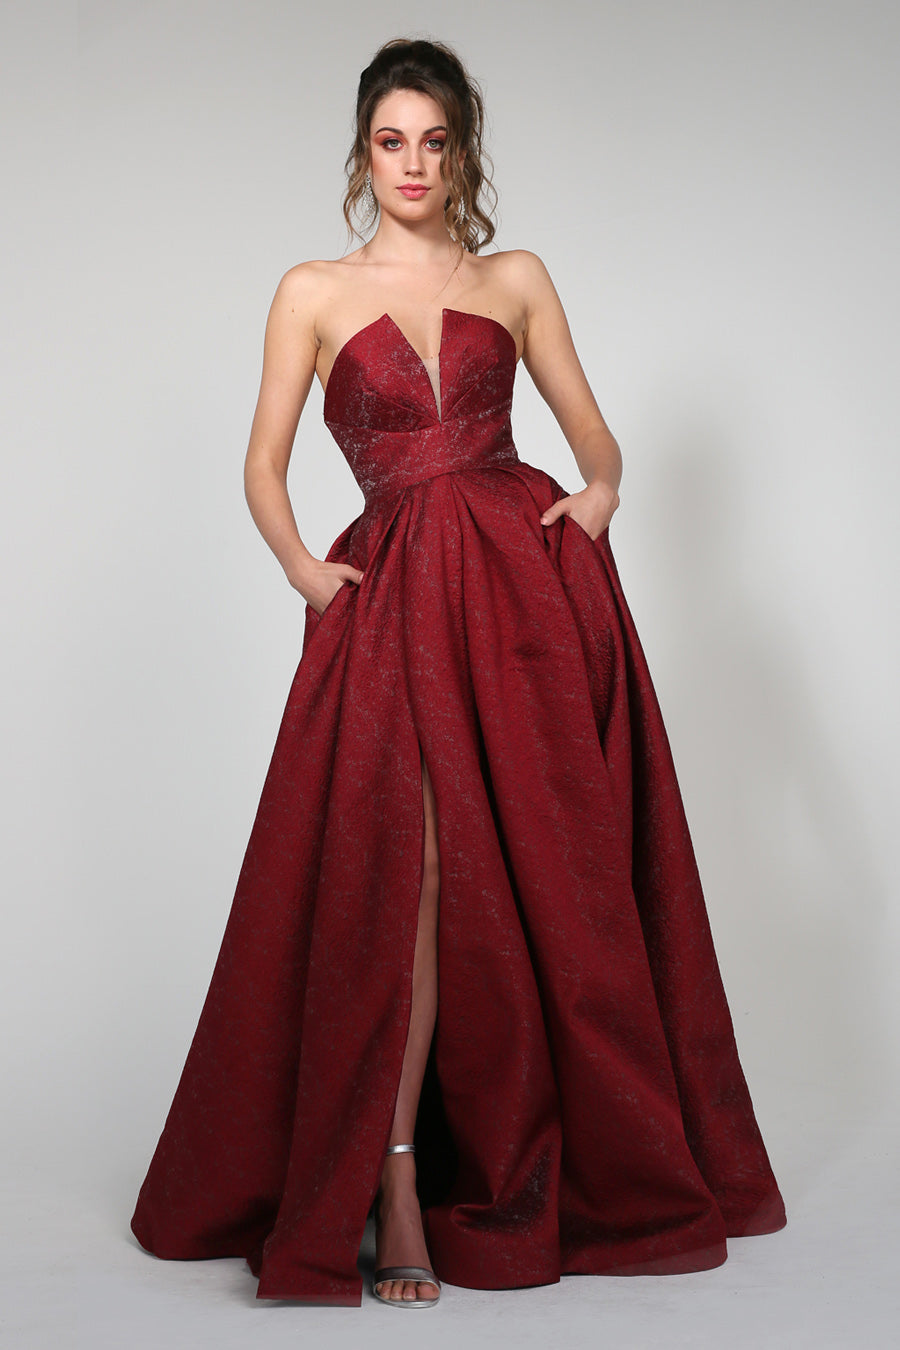 Tinaholy Couture TA611B Wine Strapless Ball Gown Formal Dress {vendor} AfterPay Humm ZipPay LayBuy Sezzle